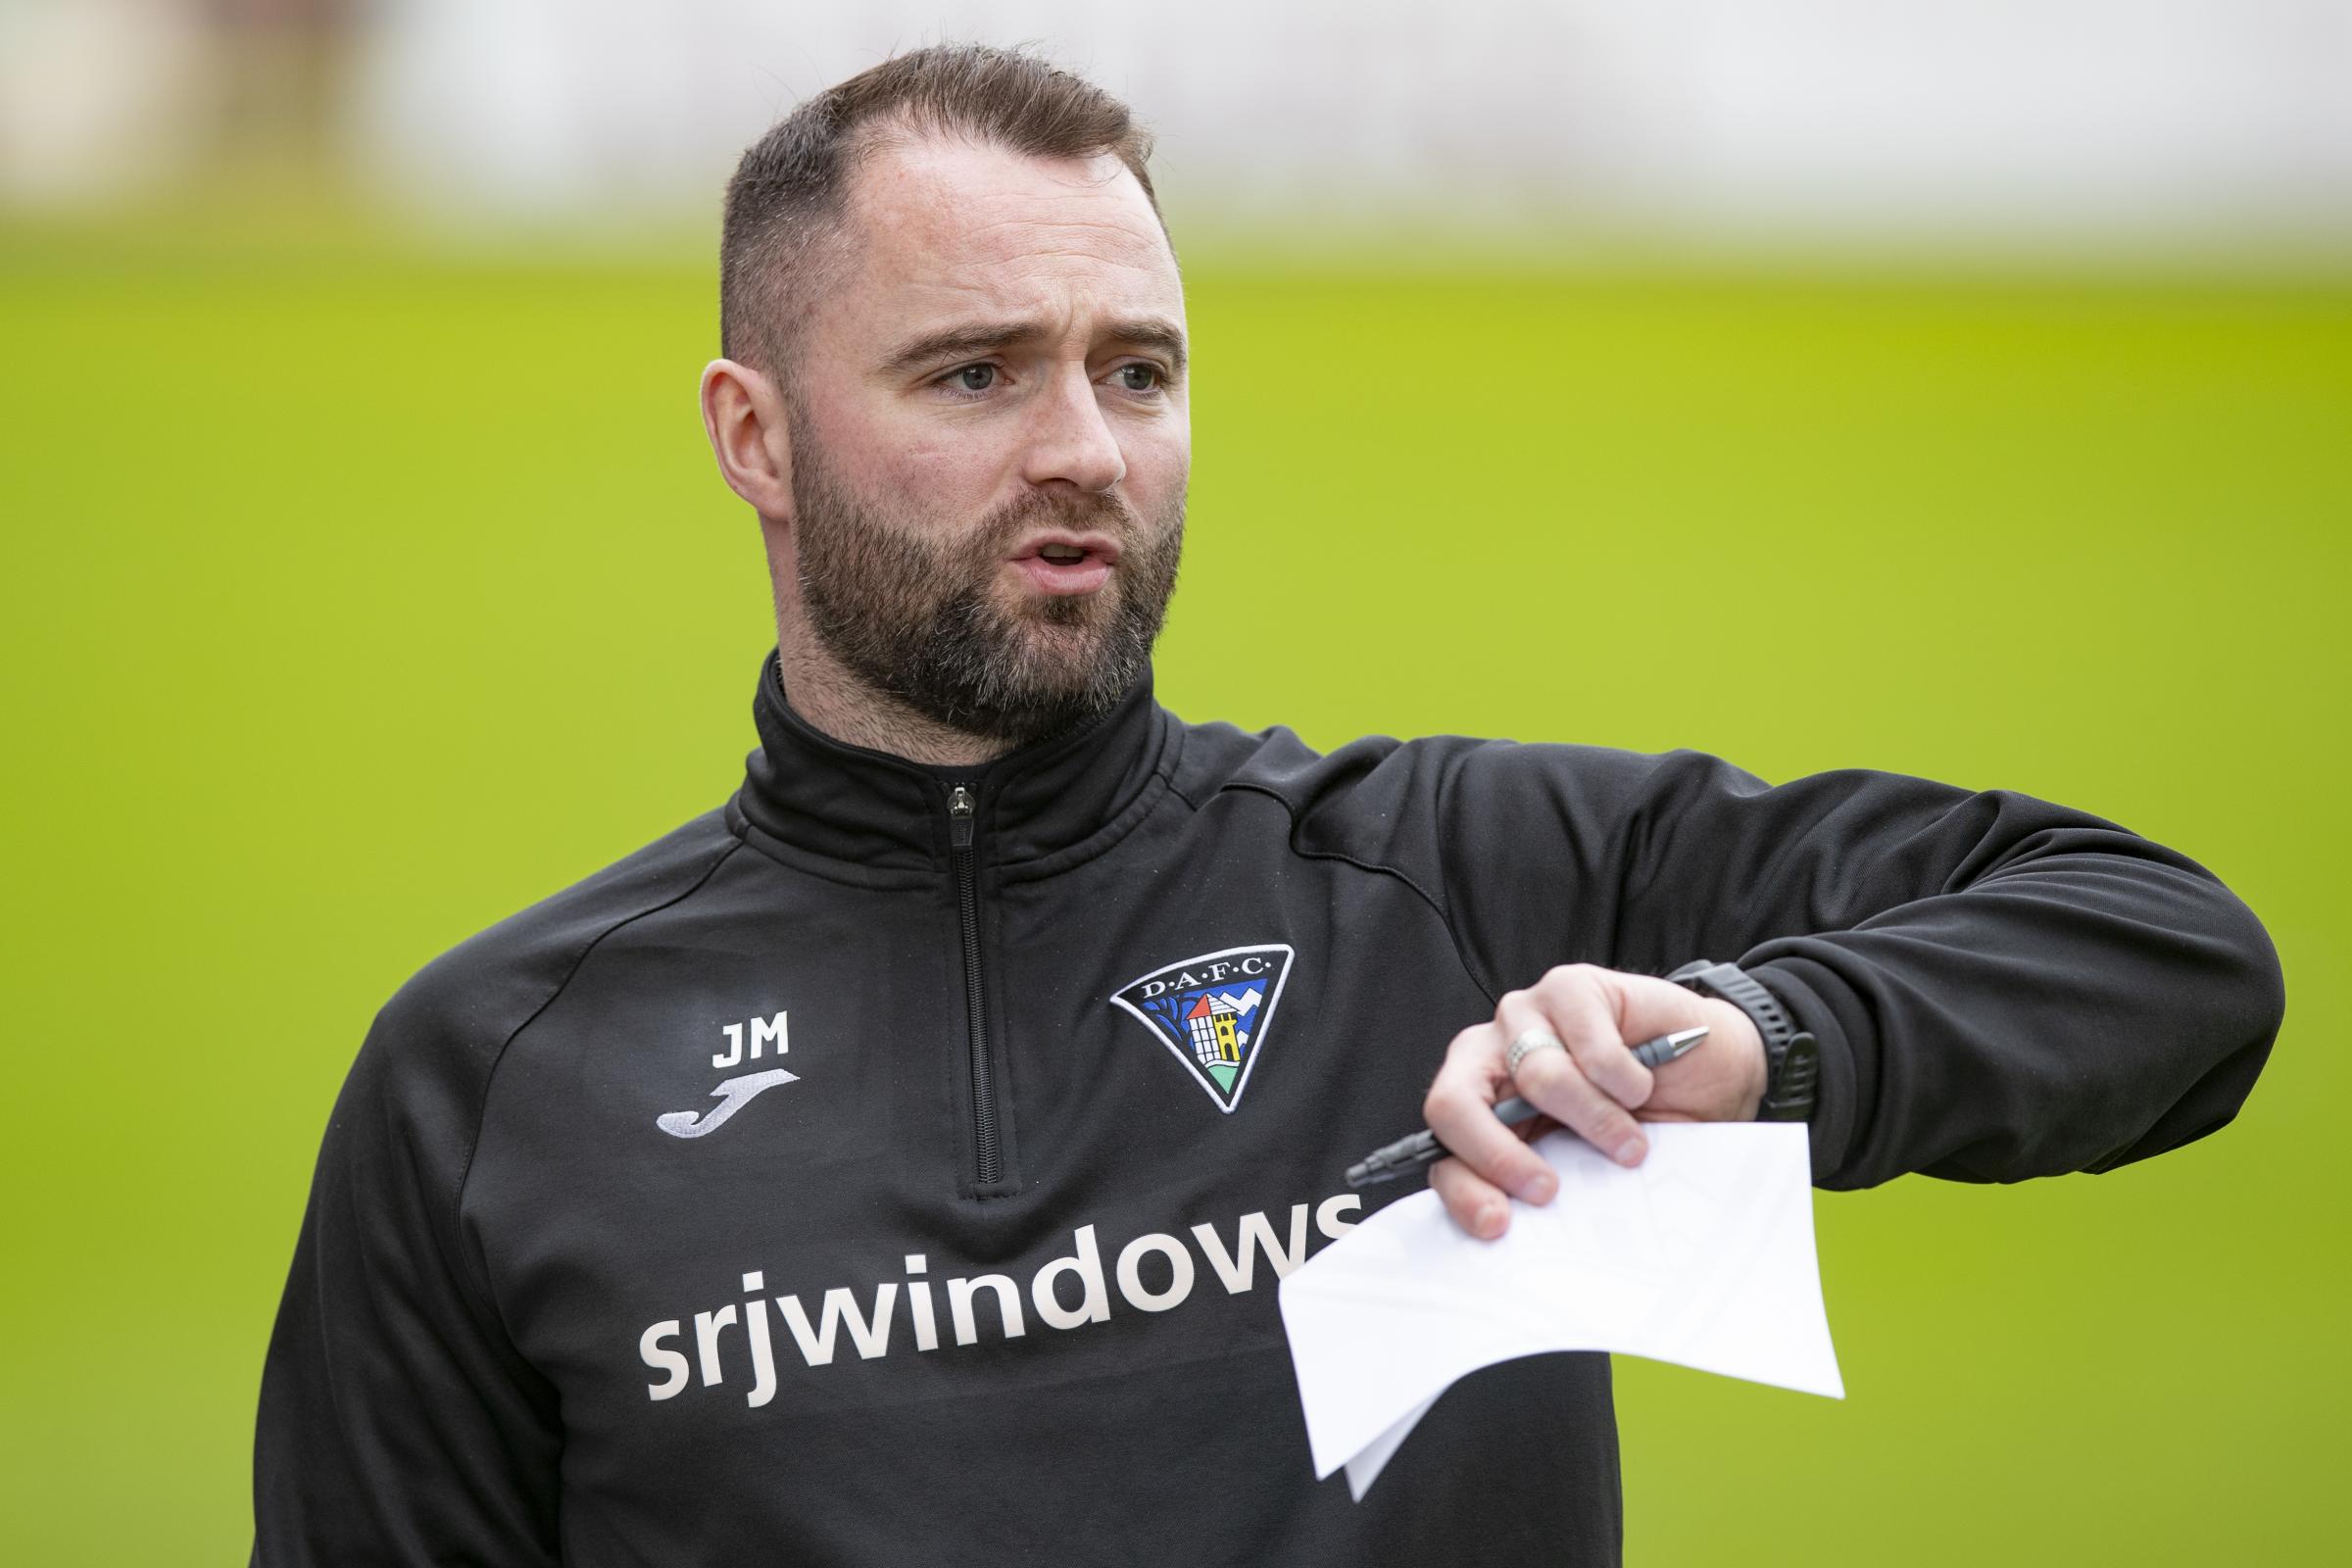 Dunfermline Athletic boss James McPake says new training ground will be huge boost